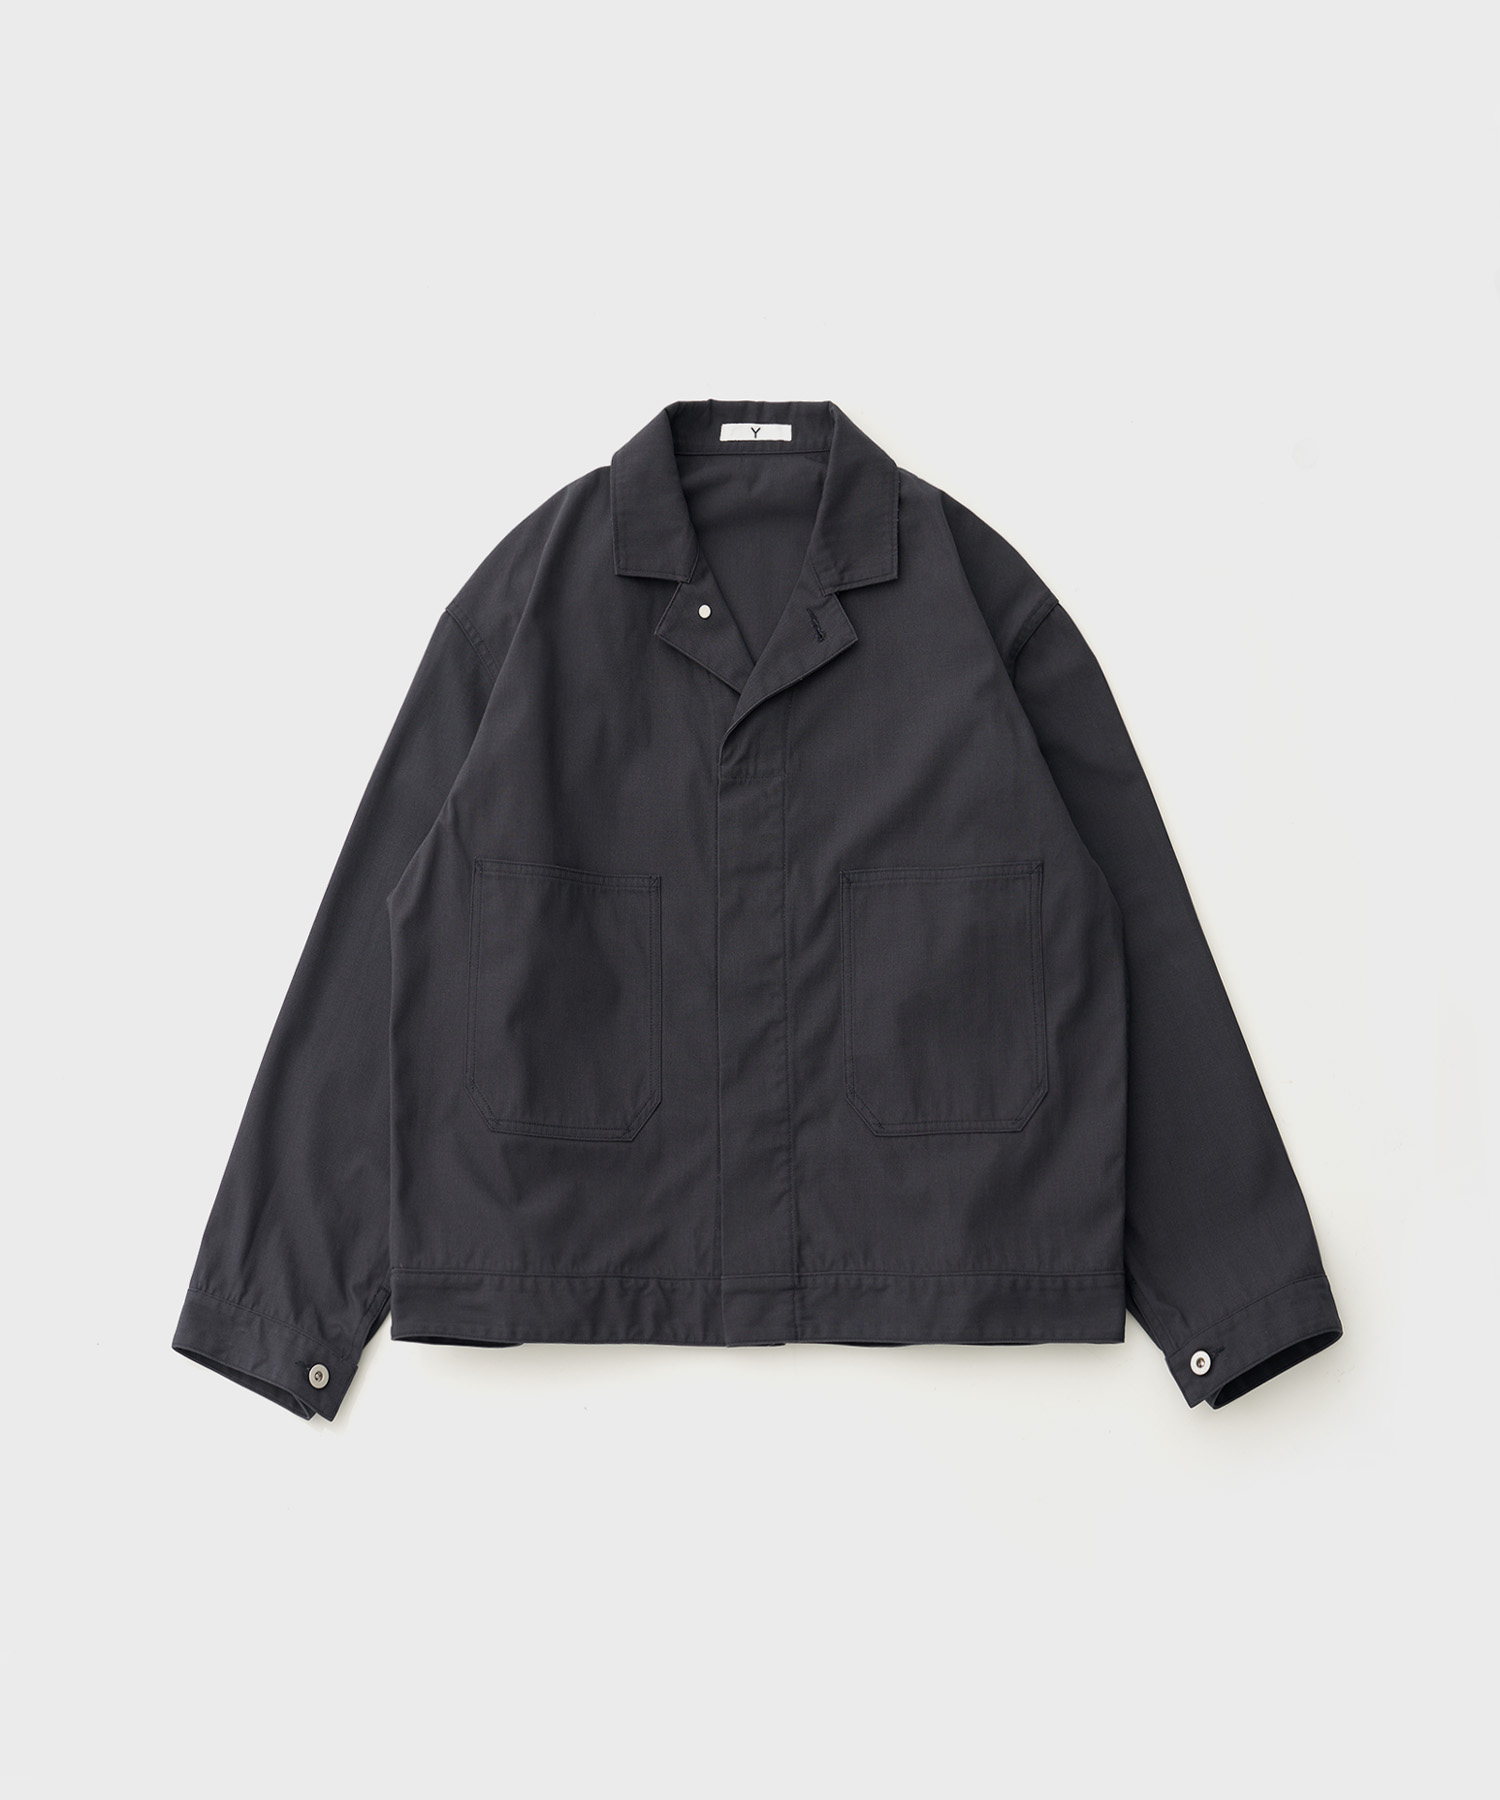 (w) Org Cotton / Recycle Polyester Twill Blouson (Navy)